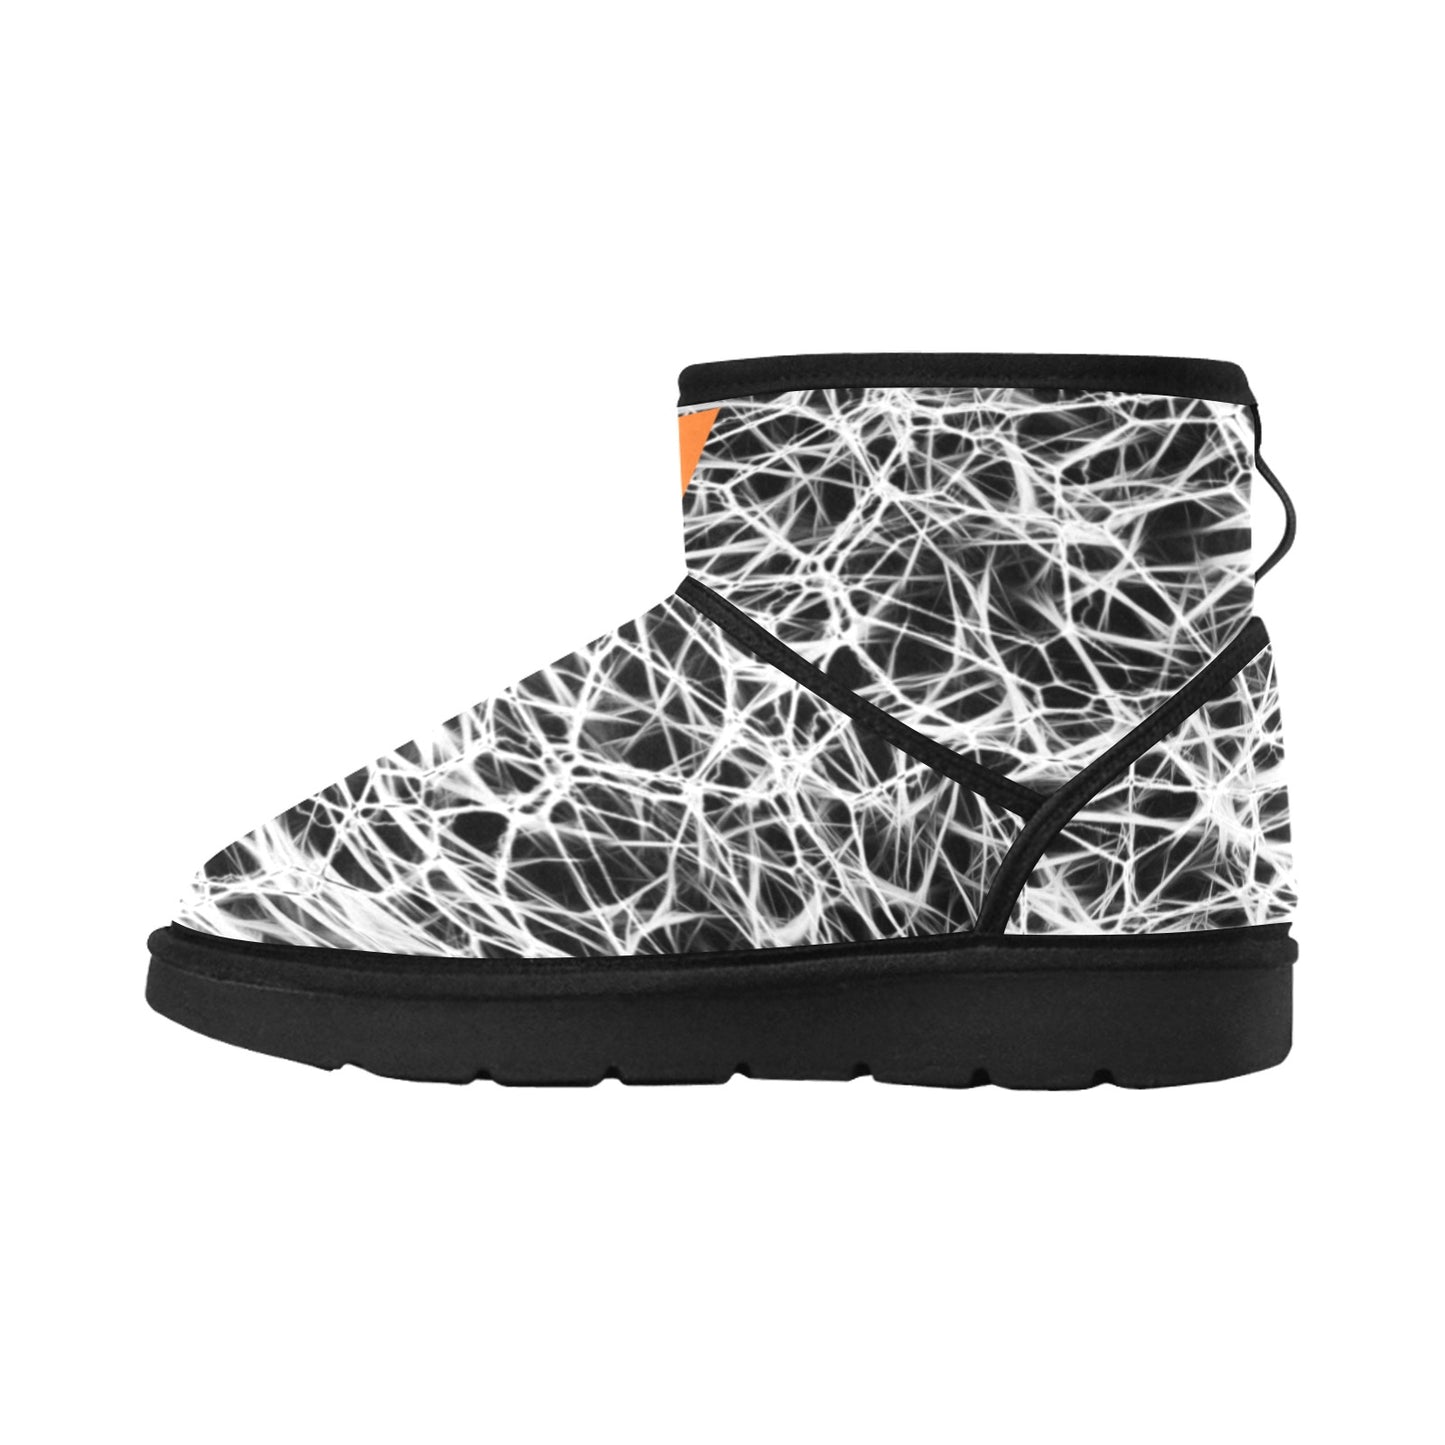 Wired Black Vluxe by Lucky Nahum Low Men's Snow Boots